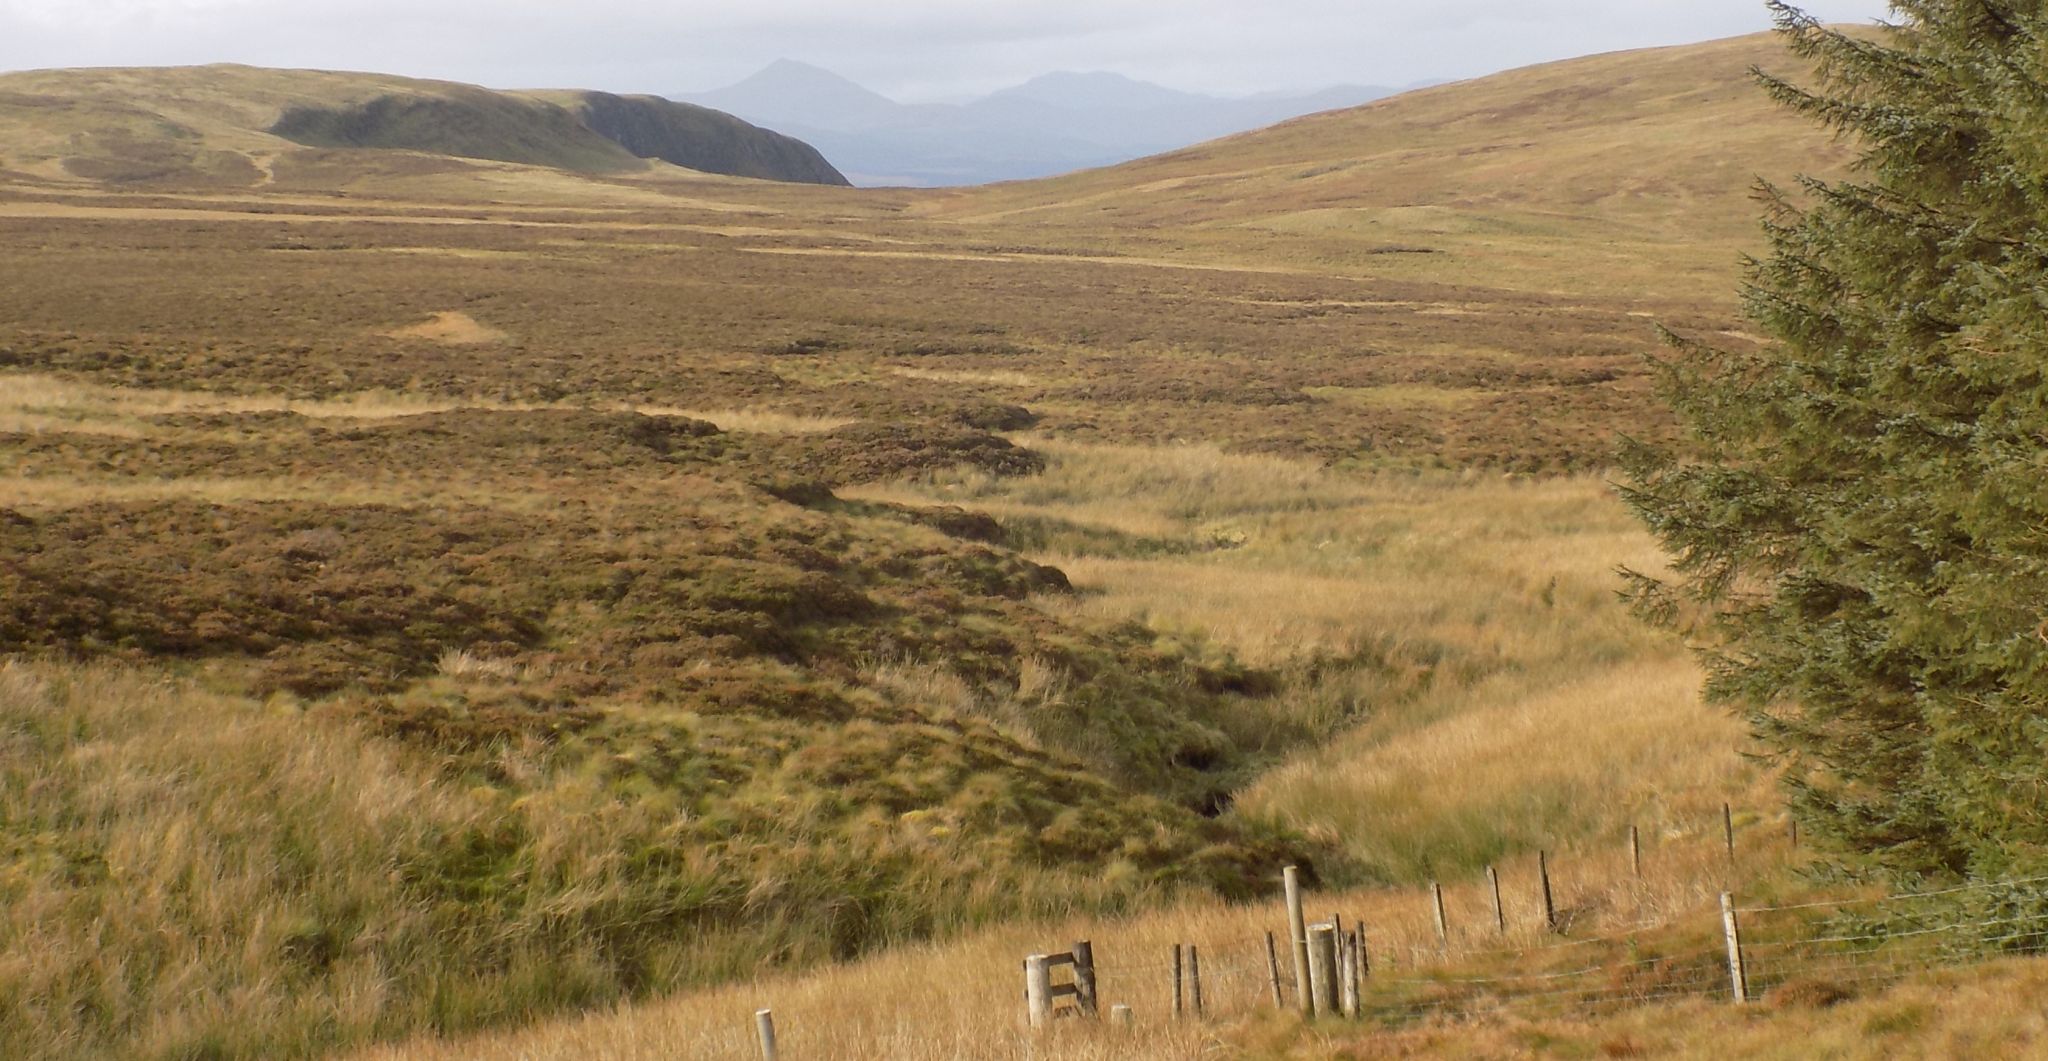 Approach to the Hole of Kailrine in the Campsie Fells